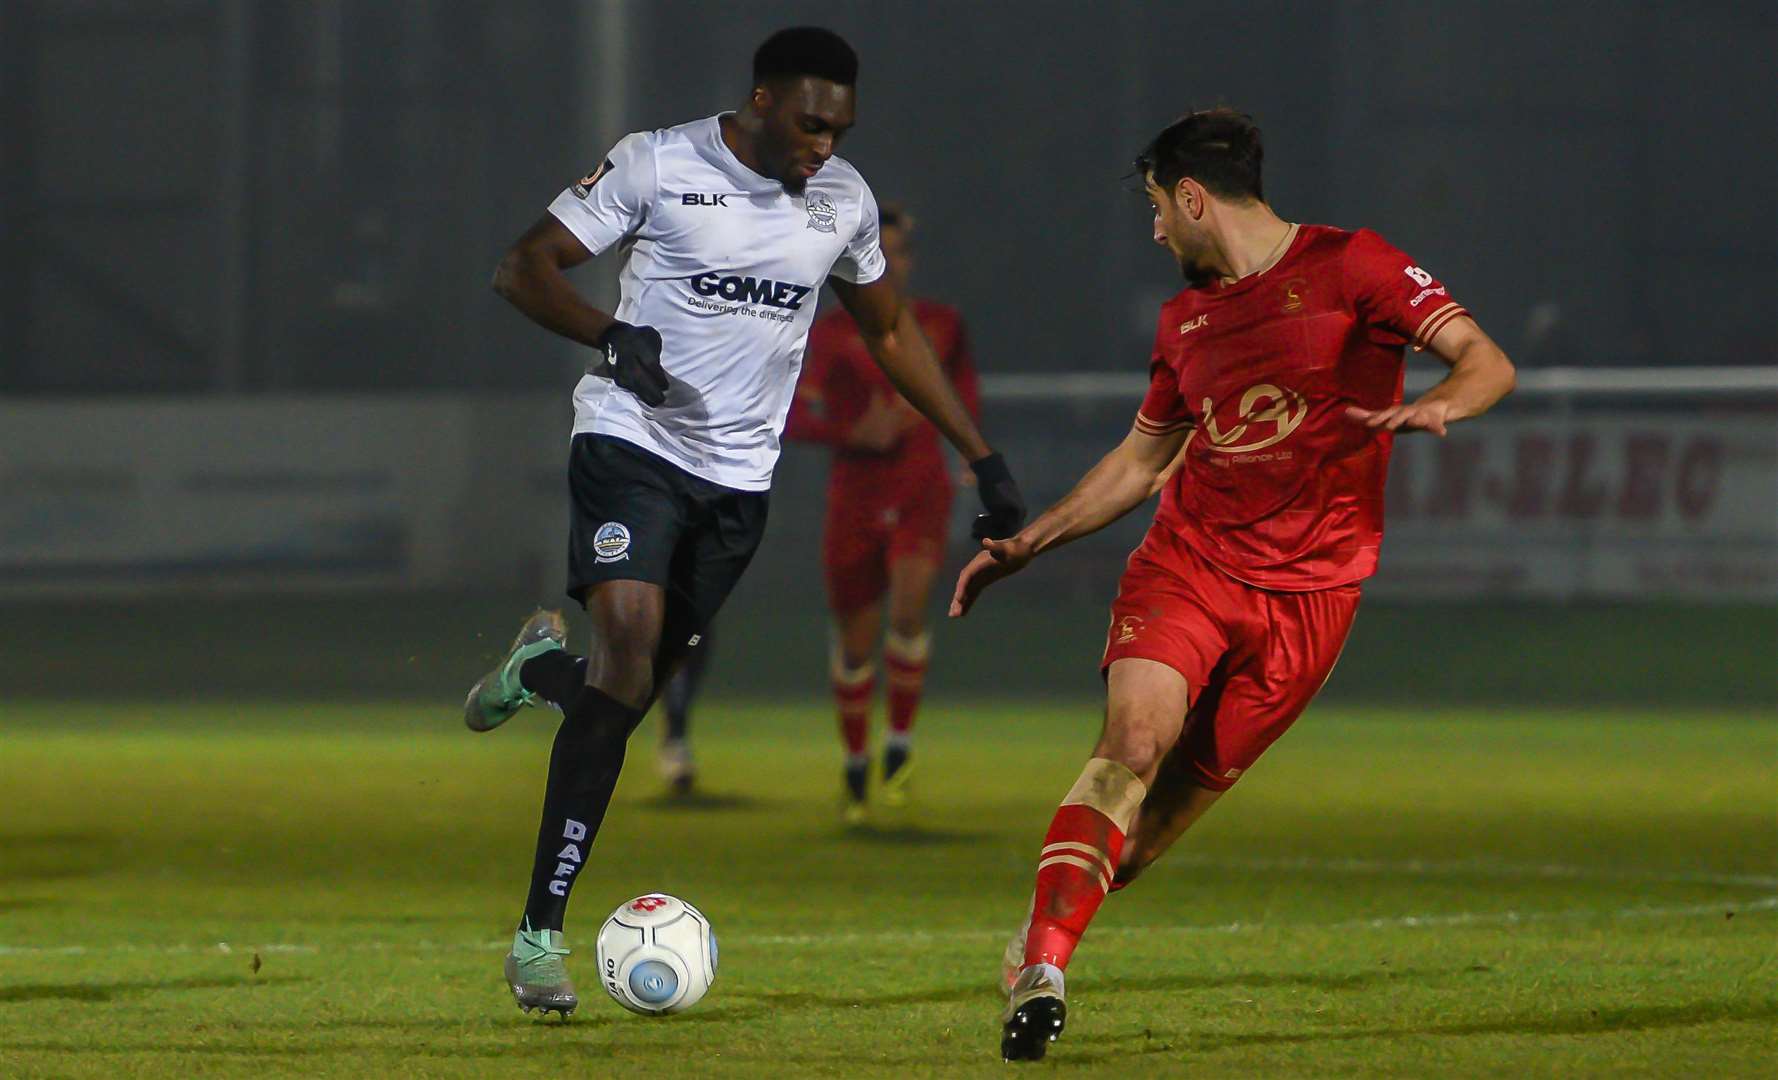 Inih Effiong on the attack for Dover against Hartlepool on Saturday. Picture: Alan Langley